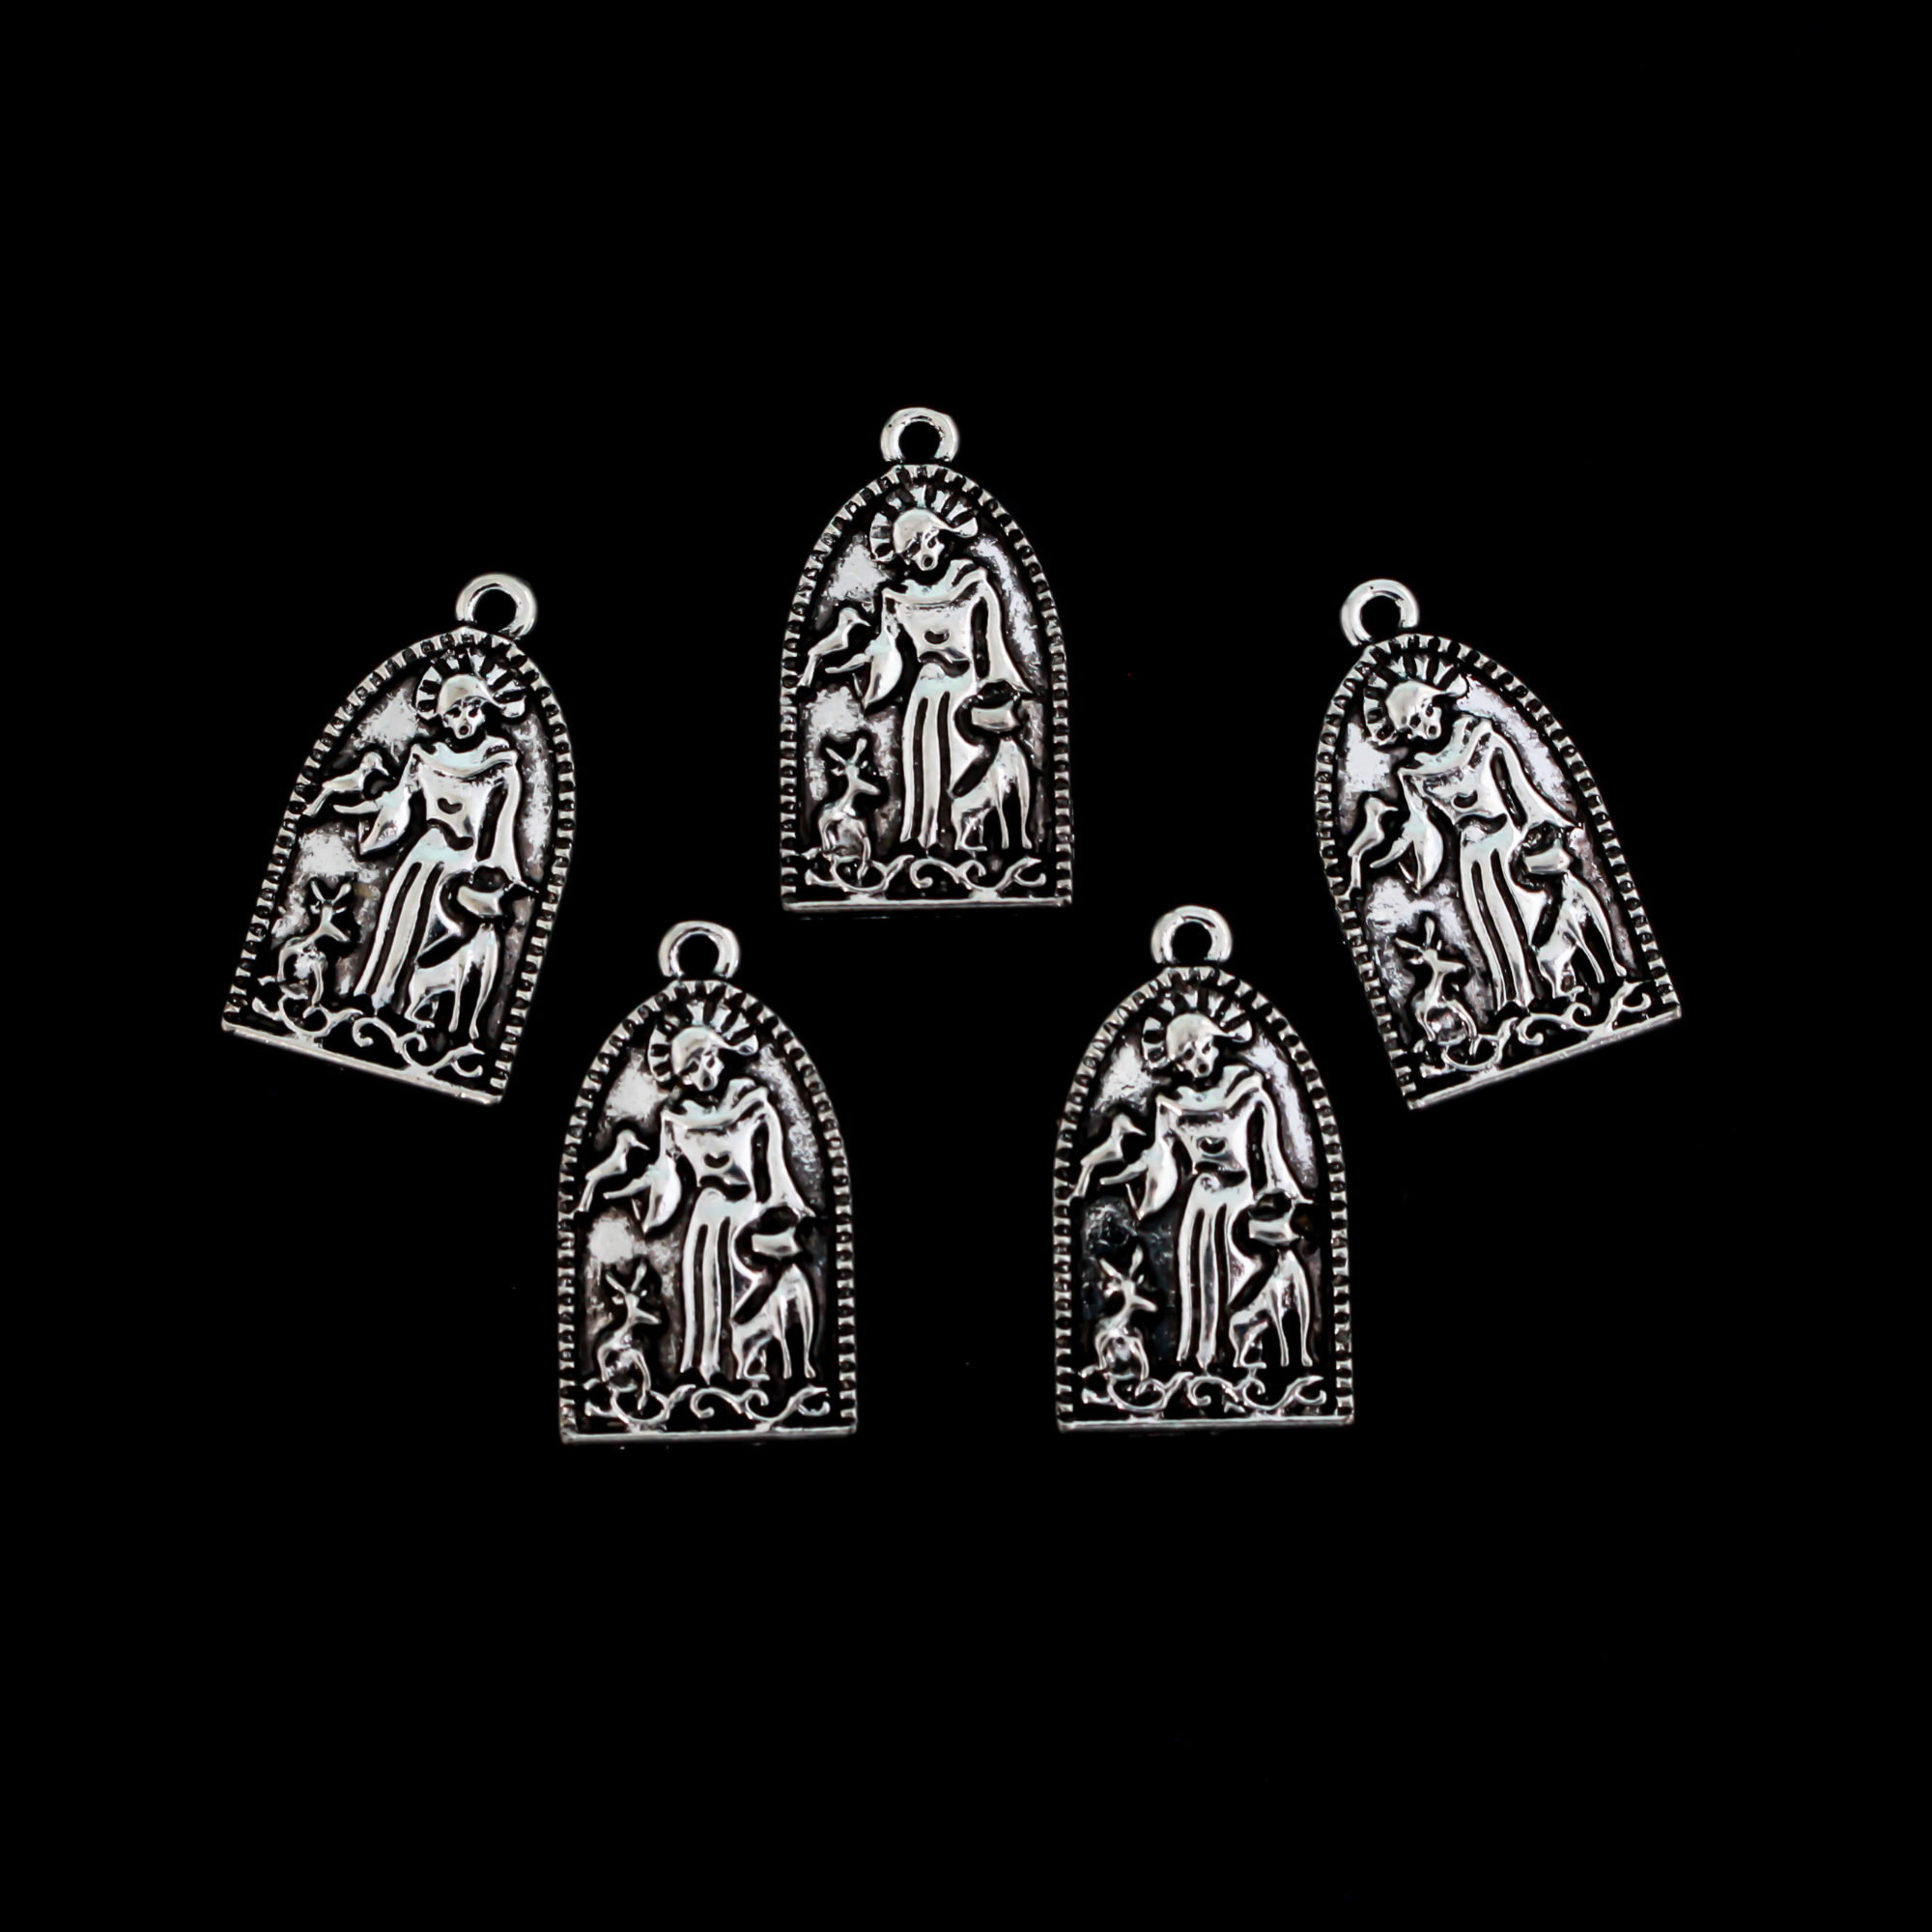 Saint Francis of Assisi charms depicting the saint with animals. The charm has an arched grotto style shape